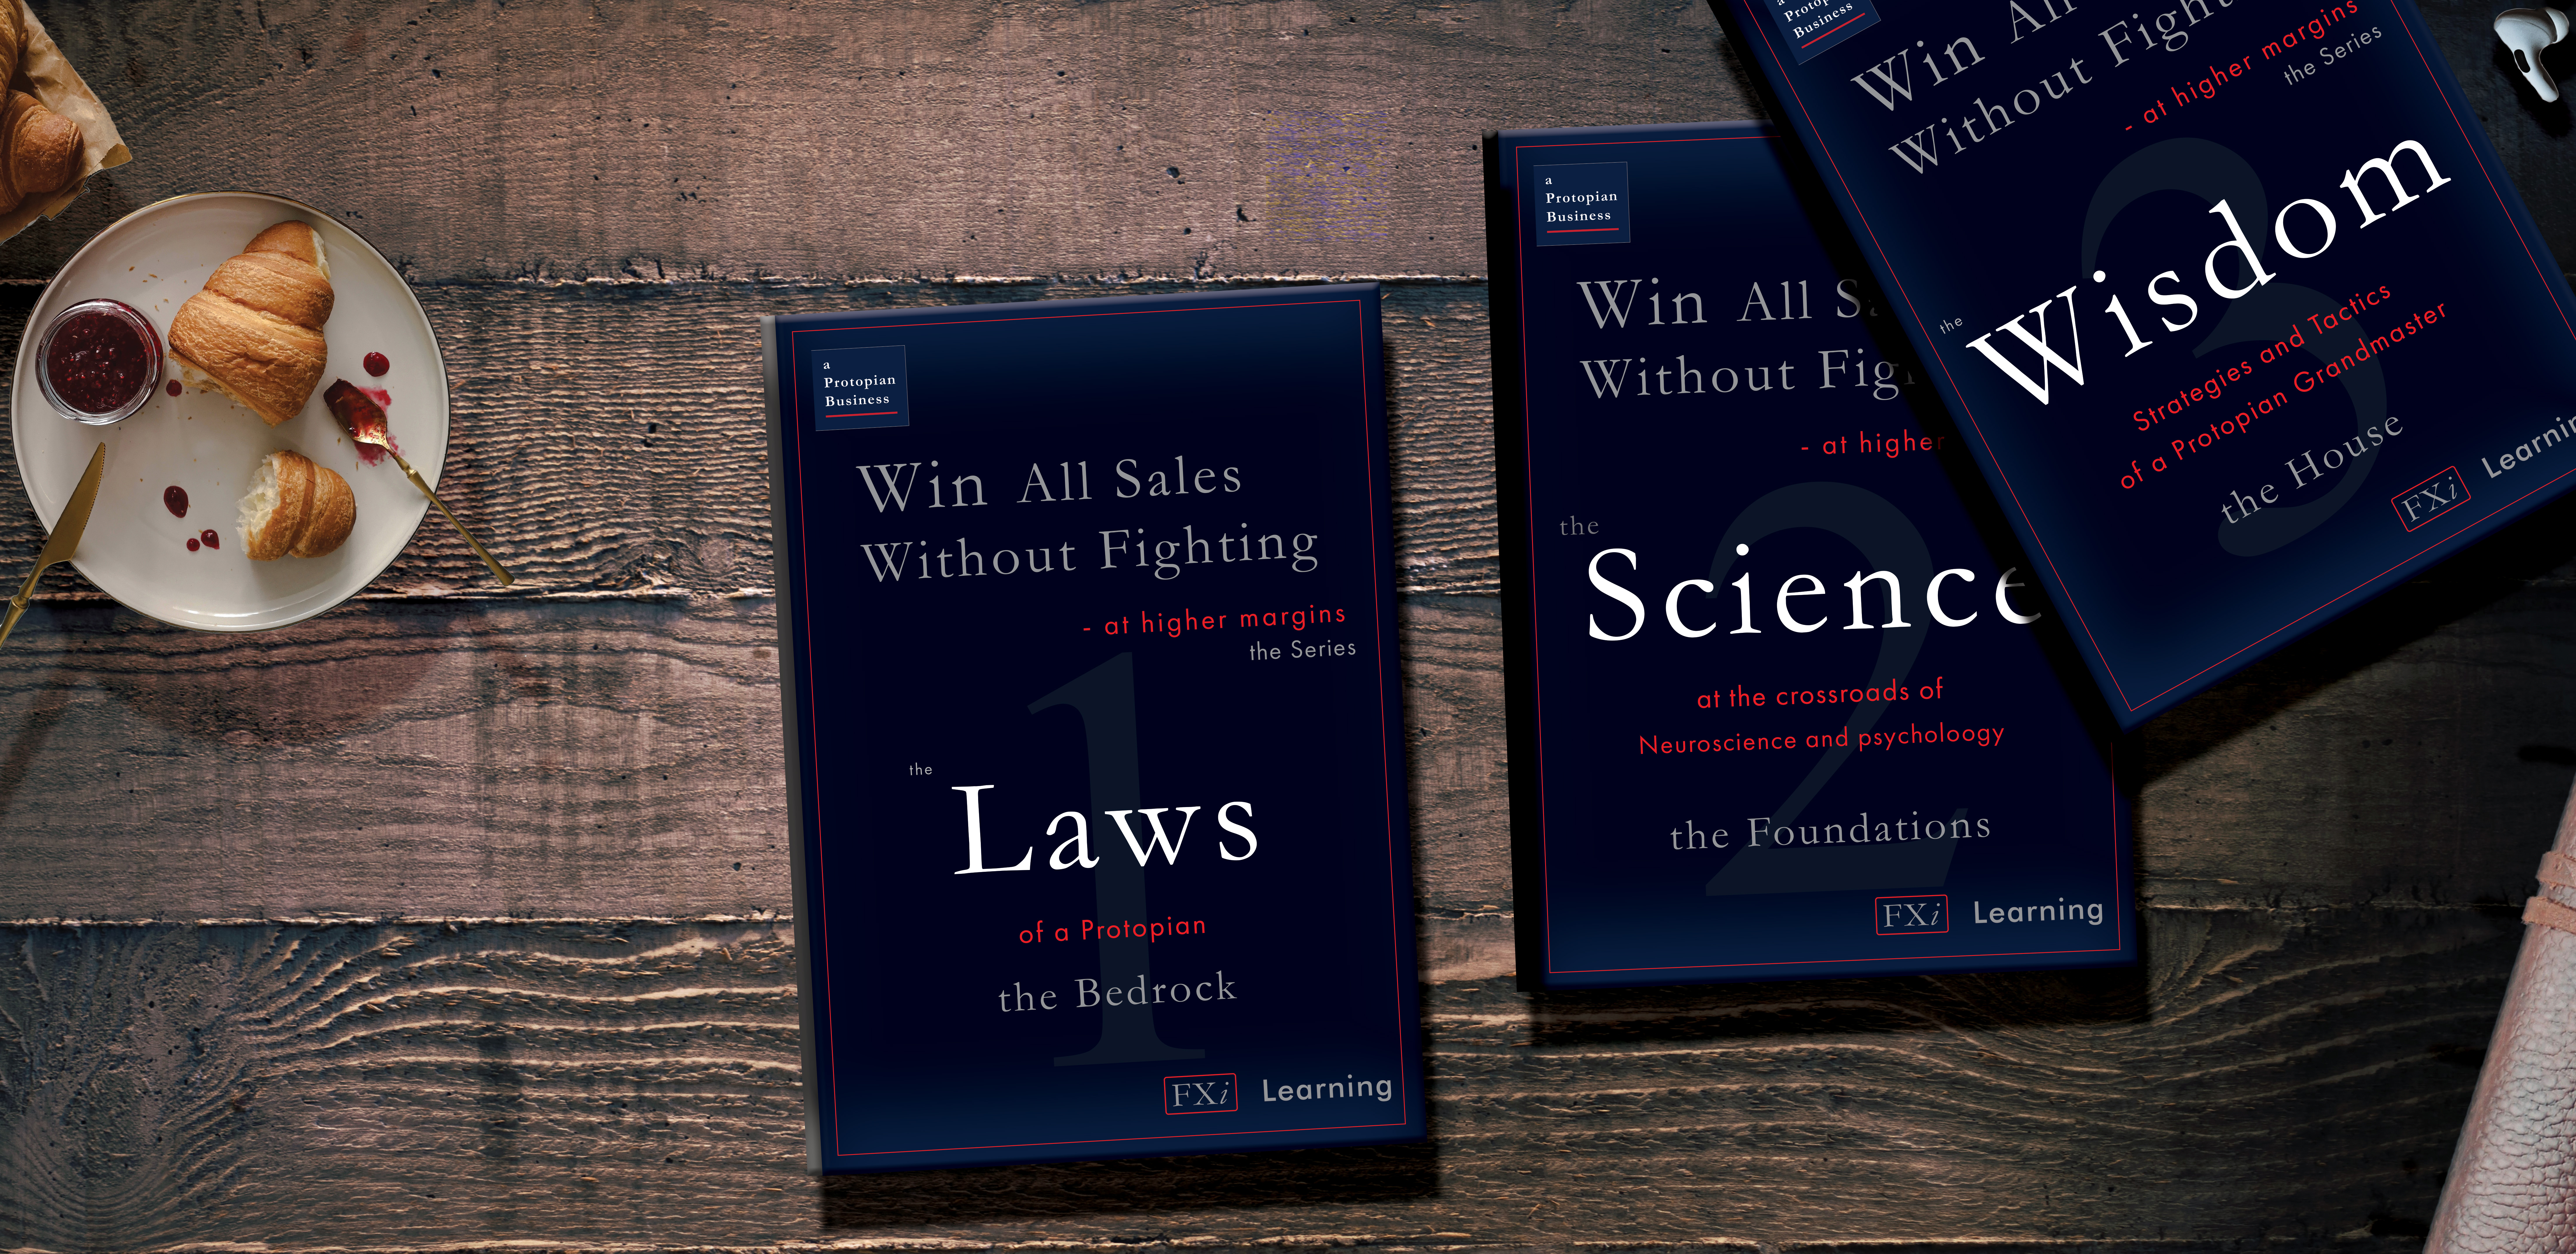 the “free ebook” section is of the three books in the series “Win All Sales without fighting at higher margins. The background is an antique hardwood desk.  The first book, the Laws, is in the center of the screen; the second book, the Science, off to the upper right, slightly turned to the left; the third book is placed to furtherest to the right at about 15 degrees to the left, and the bottom part is on top of the covering the top right of second book. There are a set of apple earbud headphones at the top right corner to the right of the third book; A partially eaten croissant on small fine china dish is above and the left of the books. There is a small single-serving glass jar of jam and a tiny spoon with strawberry jam on the plate. the lower right is the edge of an old leather-bound journal. The light source appears to be coming from an off-screen light on the left side of the typewriter at the top.